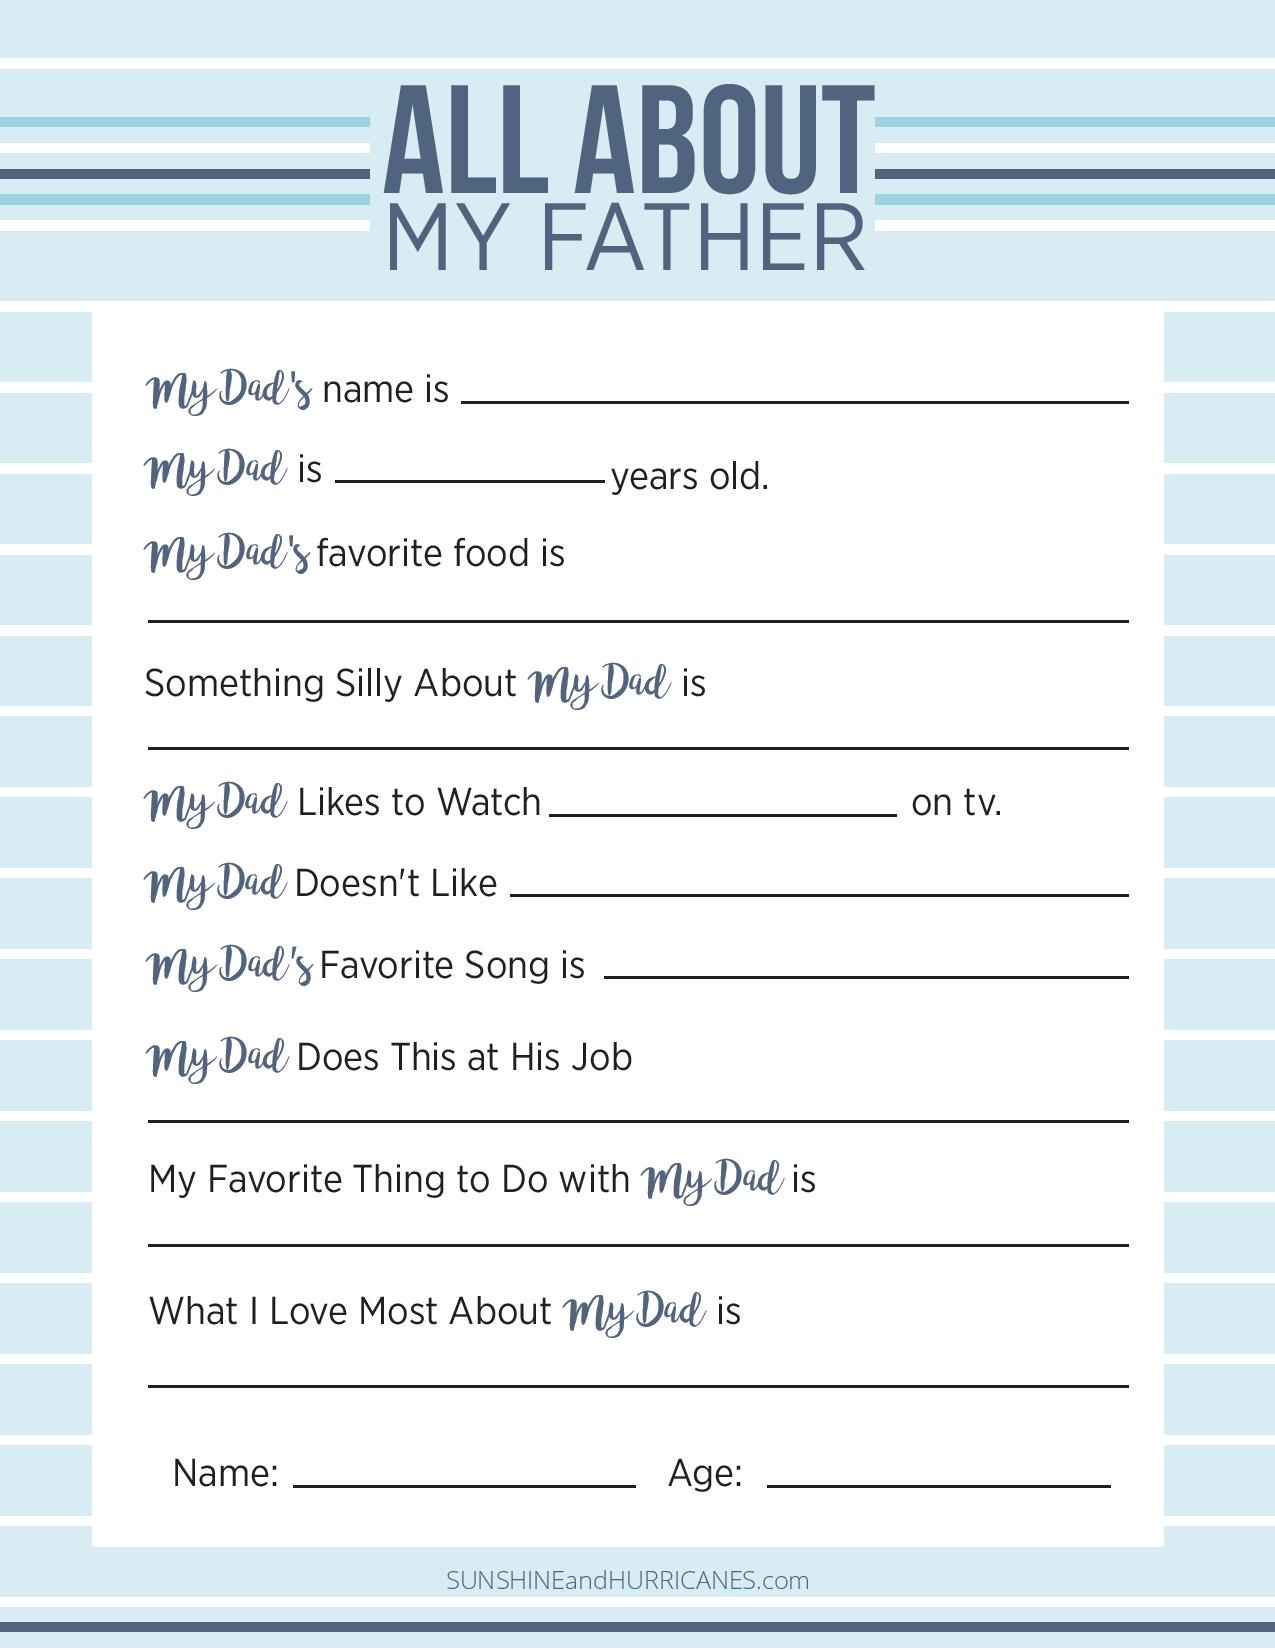 All About My Dad A Printable Father's Day Questionnaire